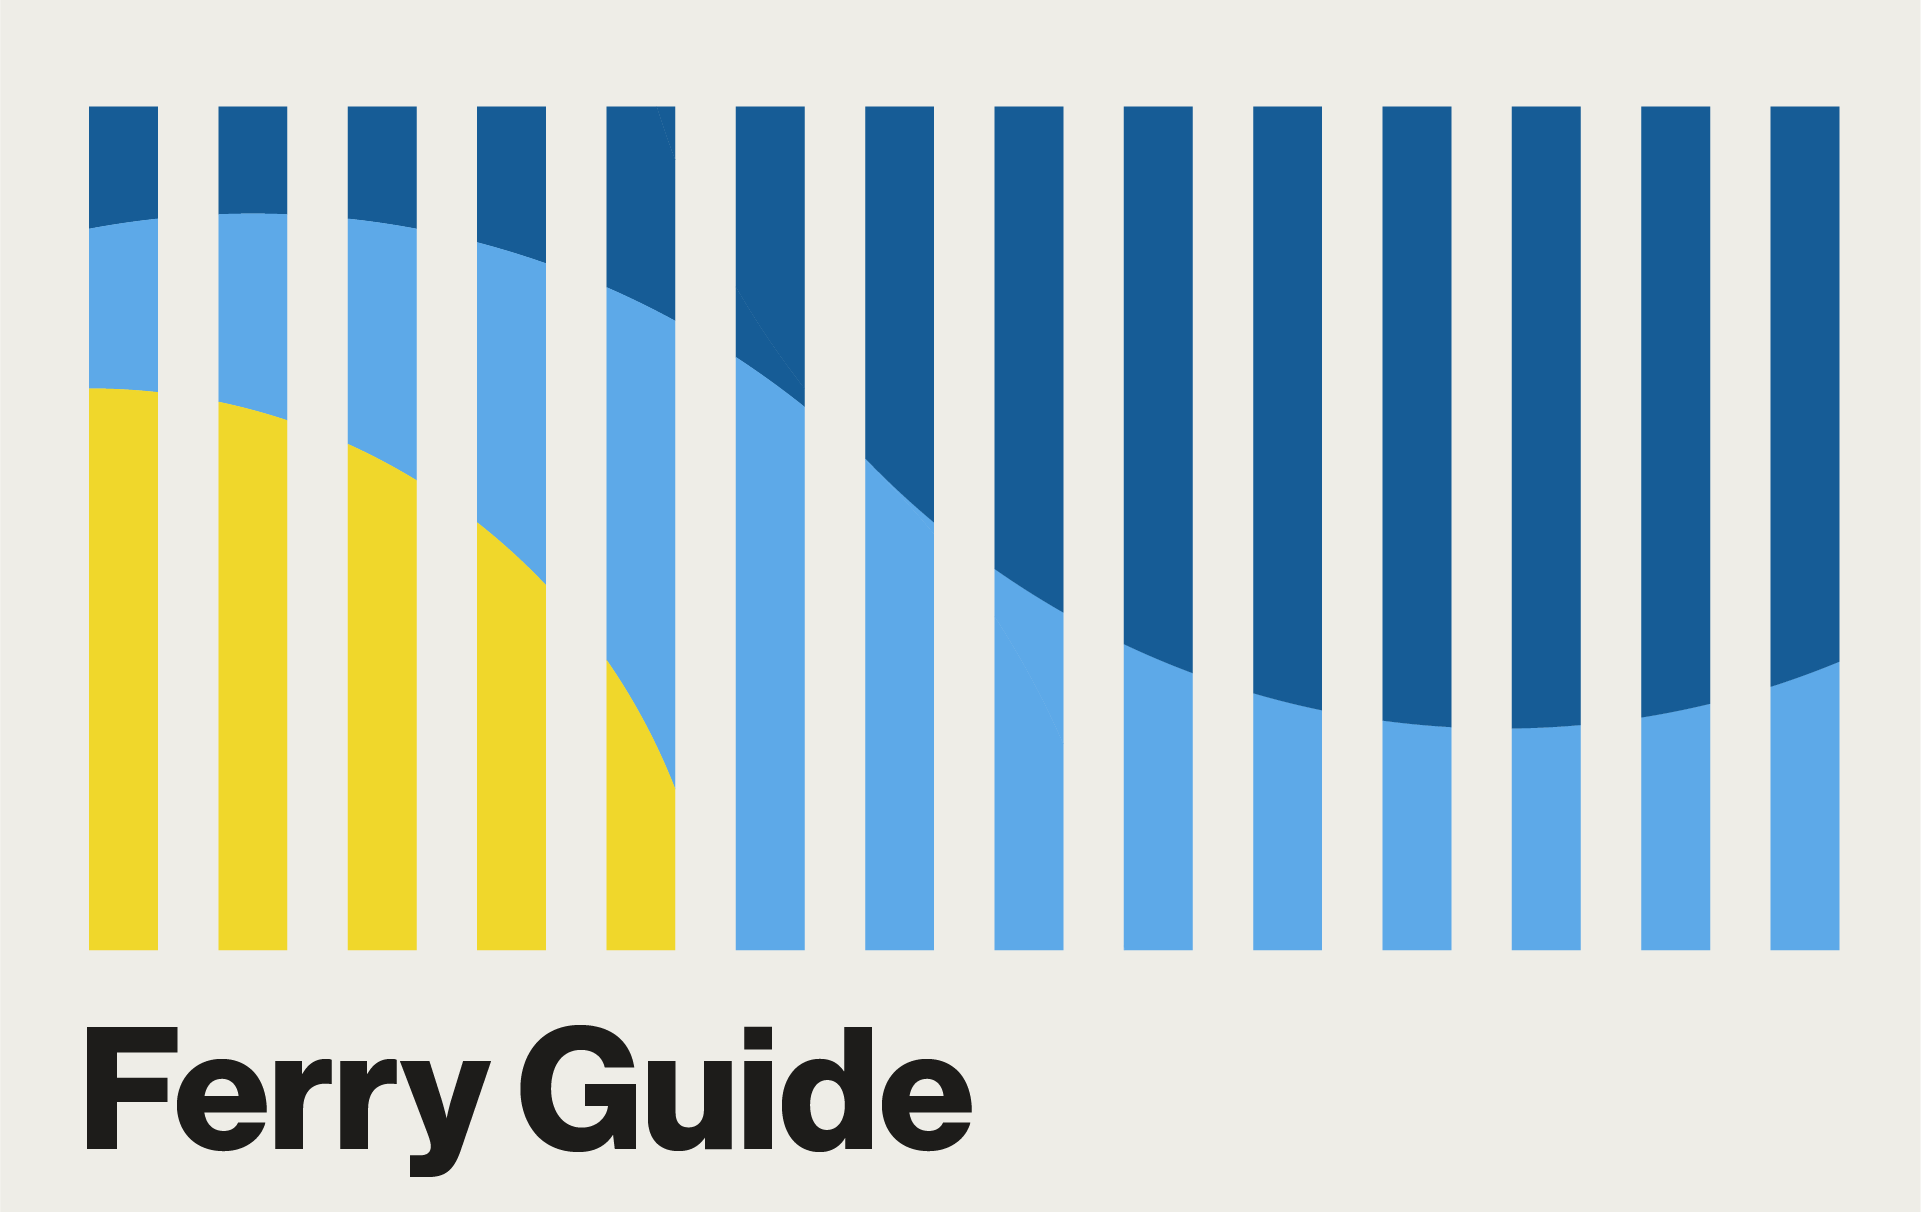 Clickable graphic for the Ferry Guide: vertical lines with a colored pattern of yellow, light blue, and dark blue